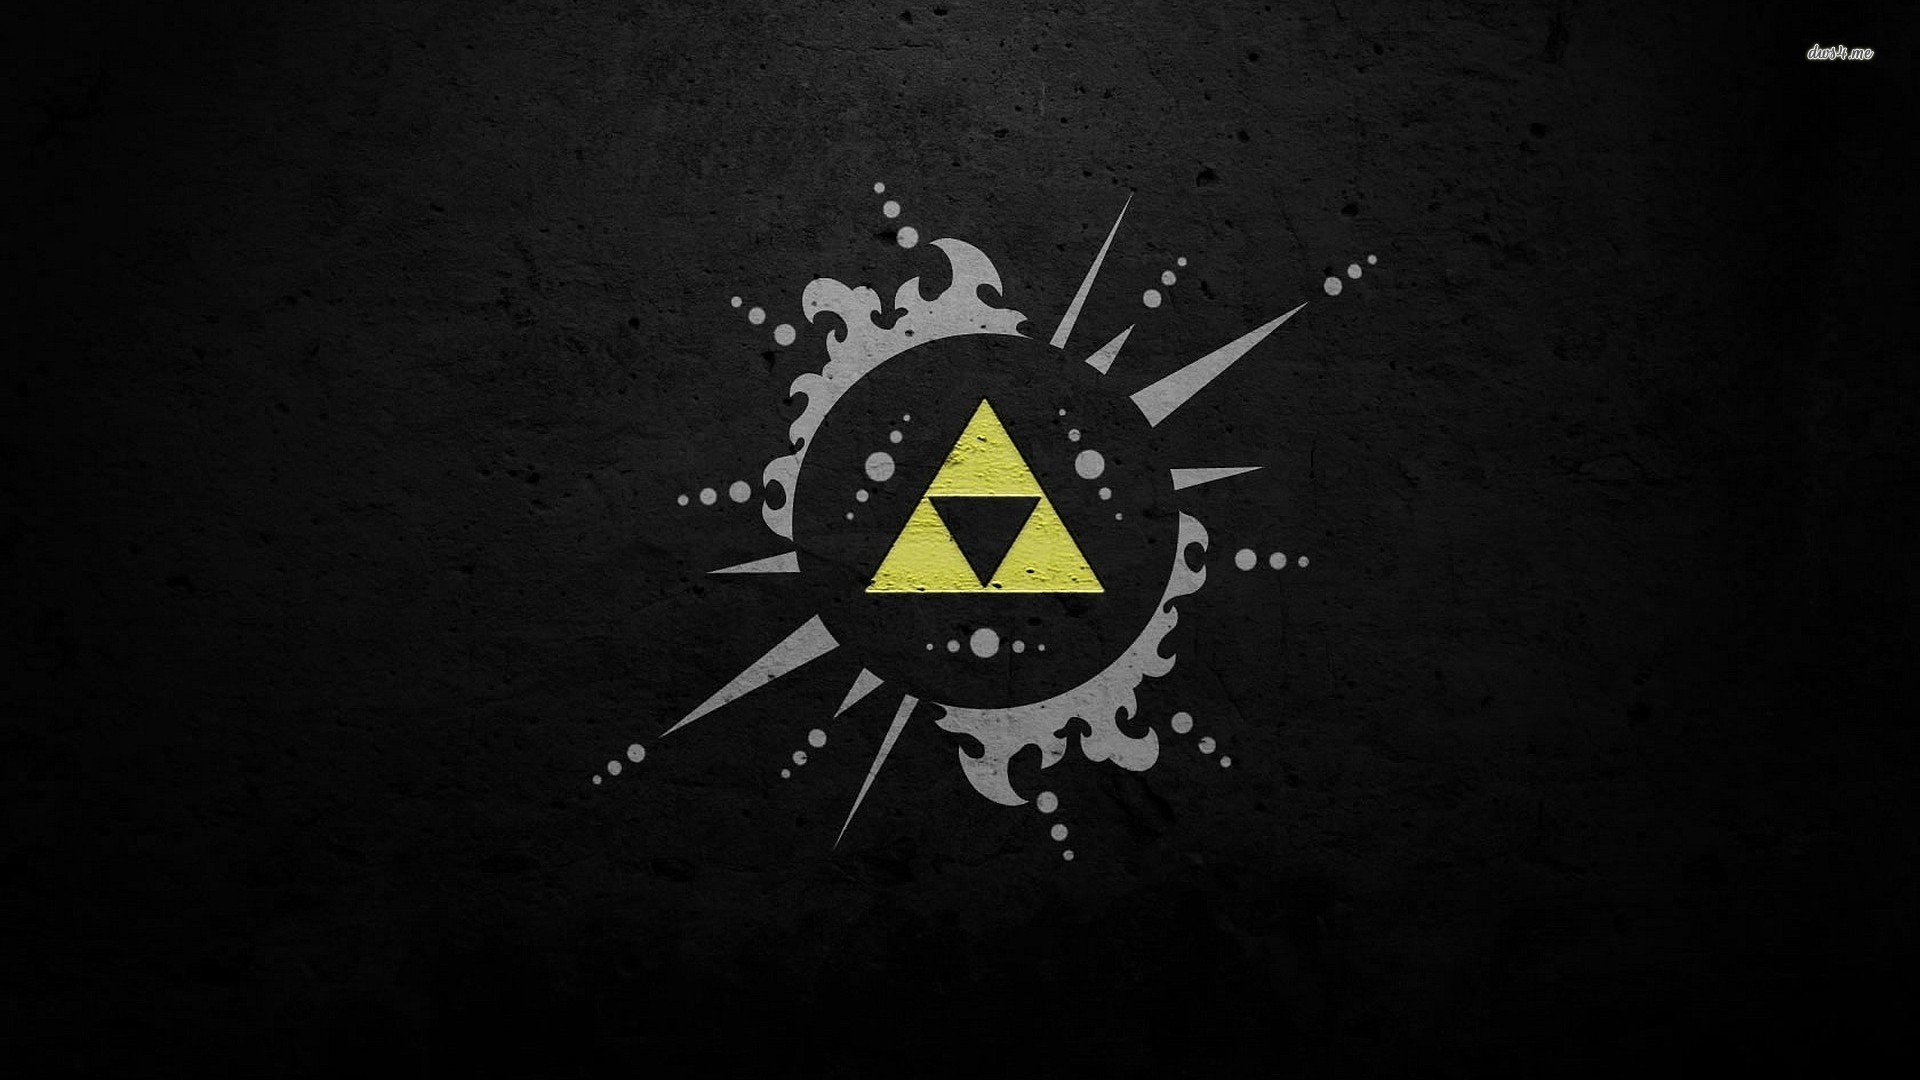 General 1920x1080 The Legend of Zelda Nintendo abstract video games watermarked Triforce video game art dark background simple background